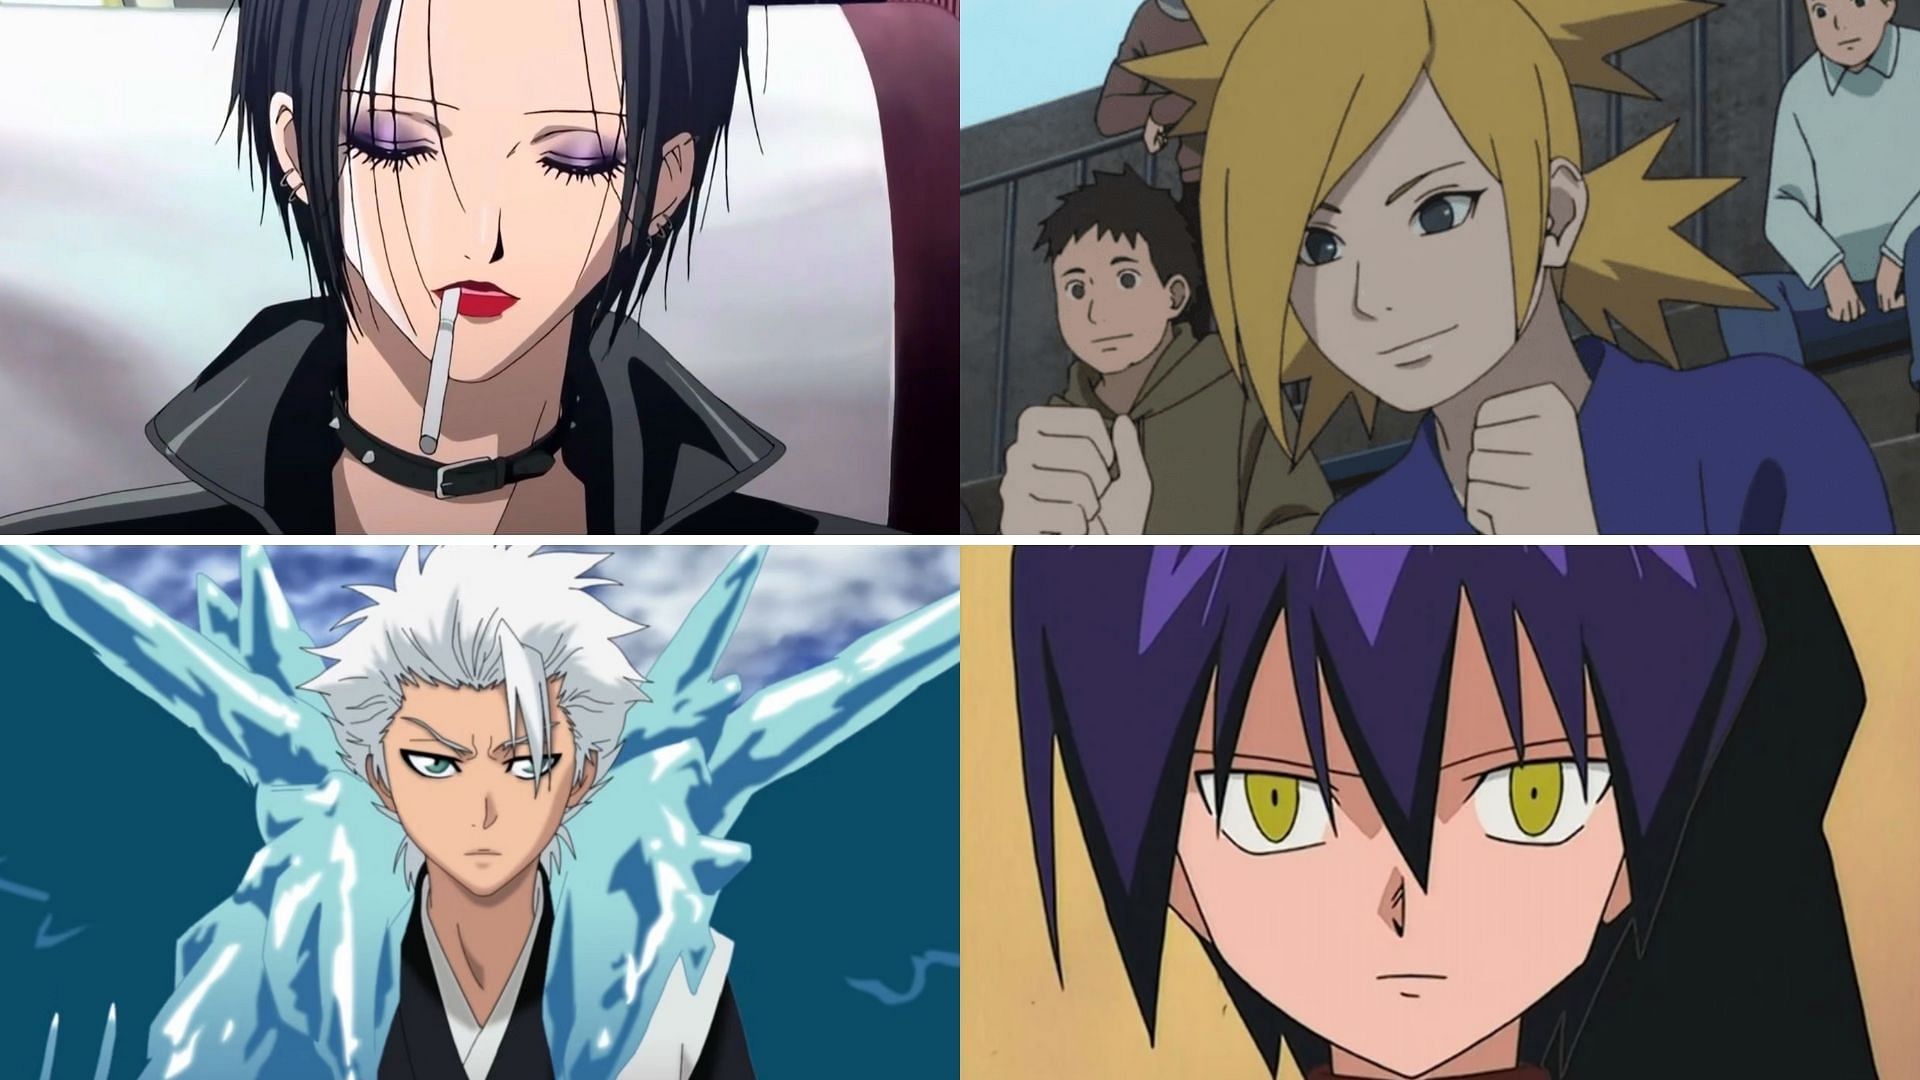 Characters voiced by Romi Park (Images via Nippon Television, Studio Pierrot, VAP, Shueisha, and Madhouse)